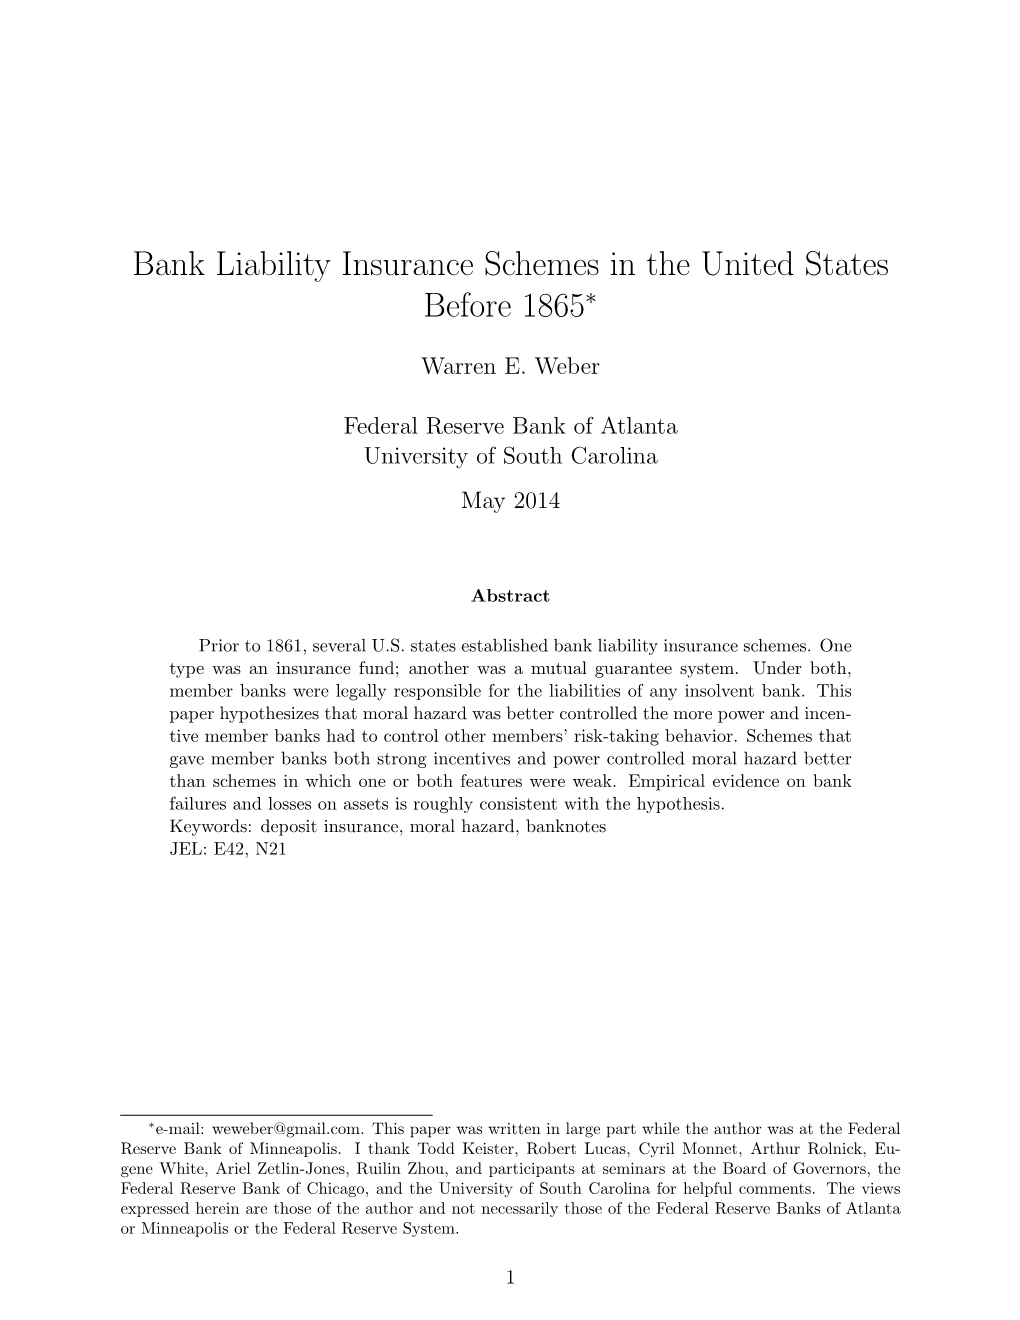 Bank Liability Insurance Schemes in the United States Before 1865∗